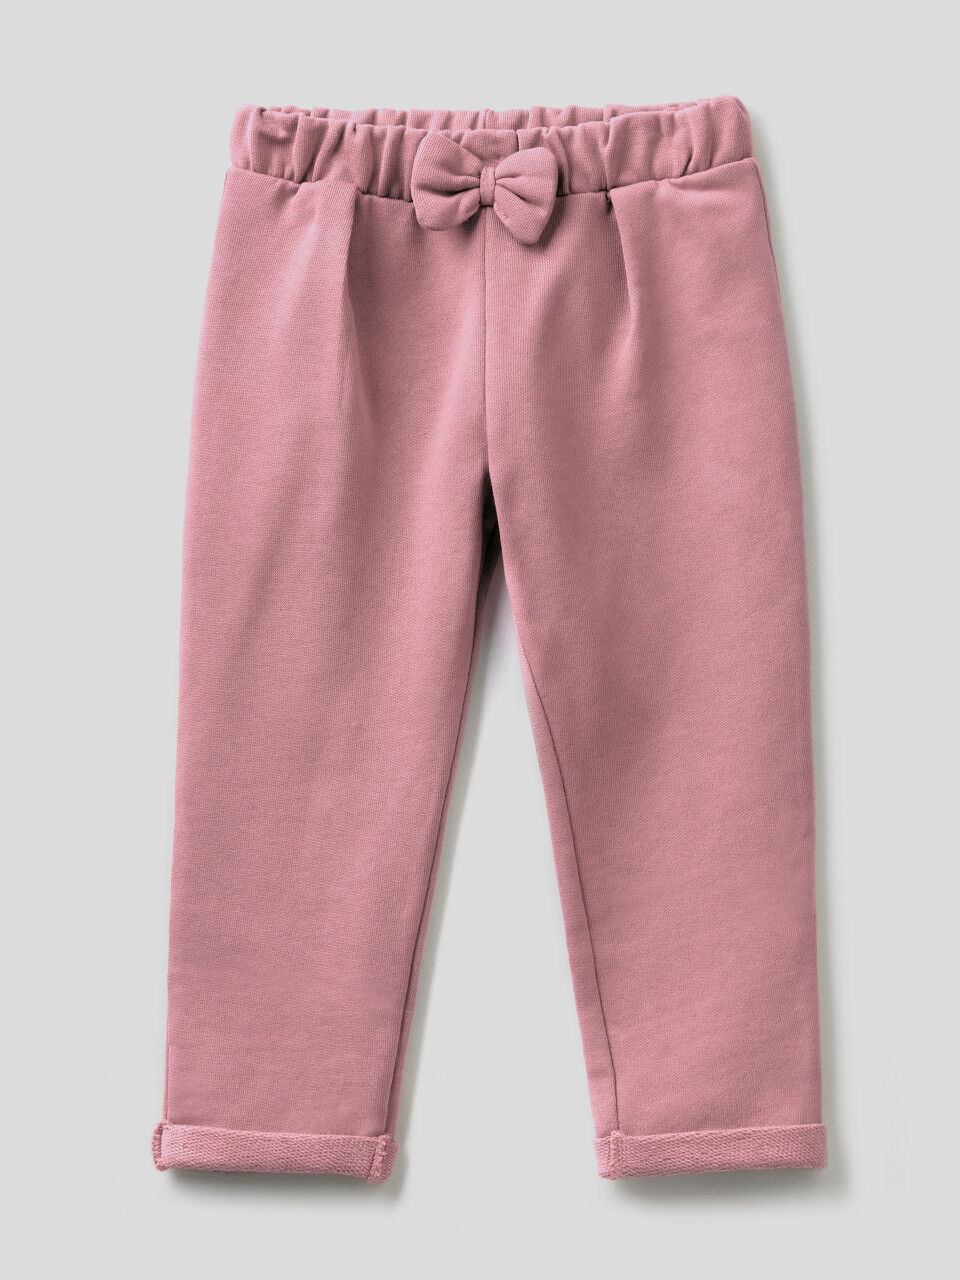 Sweatpants with bow